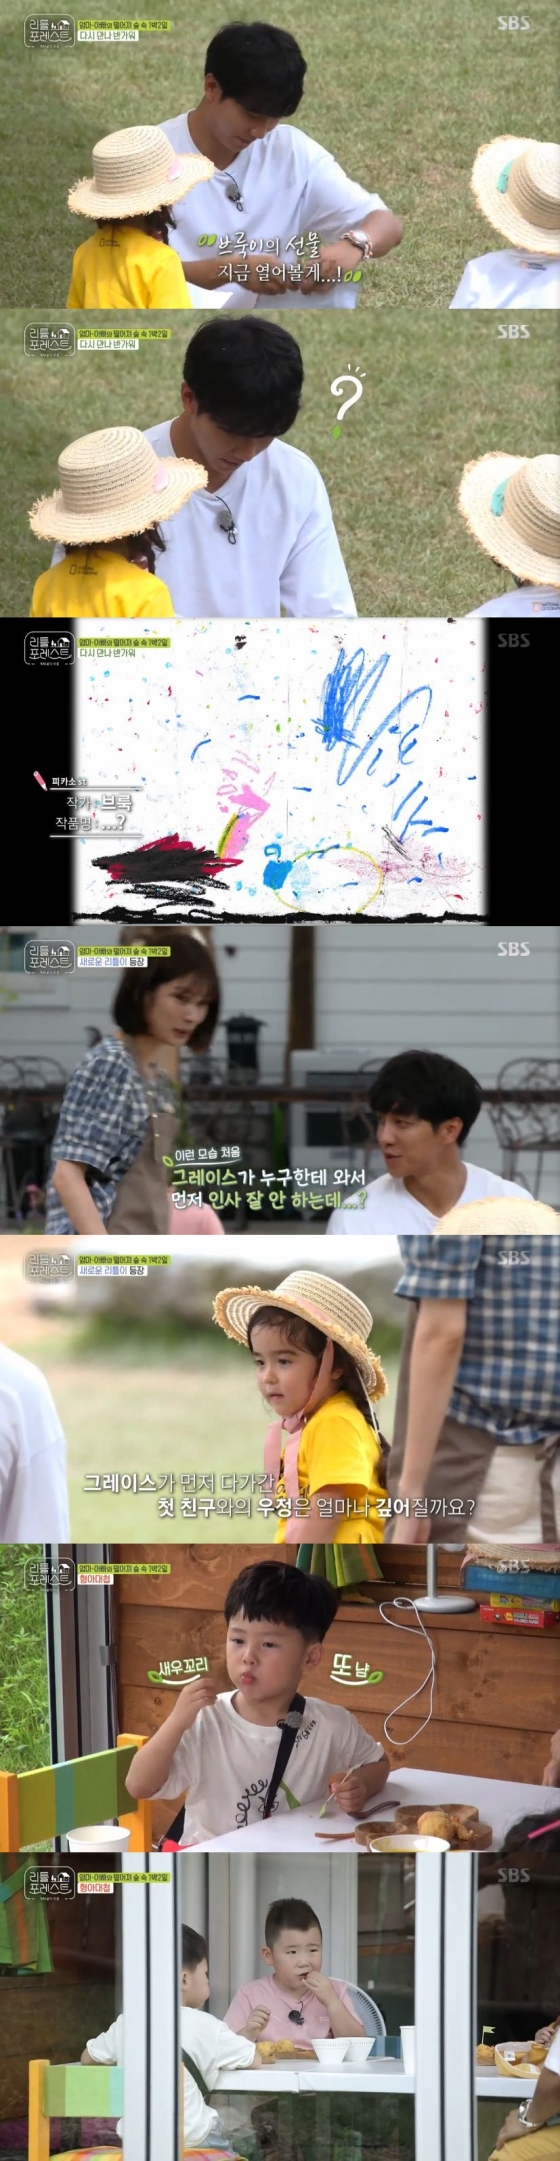 In the SBS entertainment program Little Forest broadcasted on the afternoon of the 26th, members who spend time with their parents and children were included.On this day, Miss Brooke and Miss Grace had drawn for the members themselves; Miss Brooke had taken out a painting that she had left in her pocket and handed it to Lee Seung-gi.Lee Seung-gi laughed, saying, Its like taking out pocket money, and received a picture looking at Miss Brook with a falling eye.Lee Seung-gi opened the picture and looked puzzled and questioned, What did this draw?Still, the picture of Miss Brooke, four, was expressed in a shape color.Ms Brook told Lee Seung-gi she had a Little Forest dream at home after she had enjoyed the last trip.In addition, not only the existing children but also the new friend This contribution group were also present.Miss Grace, who was usually unfamiliar, approached this contribution army and greeted her.Lee Seung-gi said, Grace does not come to me first and greet me well?The lunch menu was seafood arancini and pumpkin soup, and the children were happy to see if they were eating well.The children, who had finished their lunch with satisfaction, played with balloons in the yard.They then began carrying various ingredients to decorate The Shack, bringing with them a number of things in the forest, from branches to ropes, stones, logs, pine cones, and leaves.Lee Seung-gi said, I think children really think its different from us.The strong and this competition groups showed passion to carry larger logs with a sense of competition in the middle.At this time, the largest log was found, and the strong group, this contribution group, and other children all joined forces to carry the log.So after the Shack decorating, the strong army began to massage Lee Seung-gis shoulder; Lee Seung-gi was impressed by the unexpected massage.